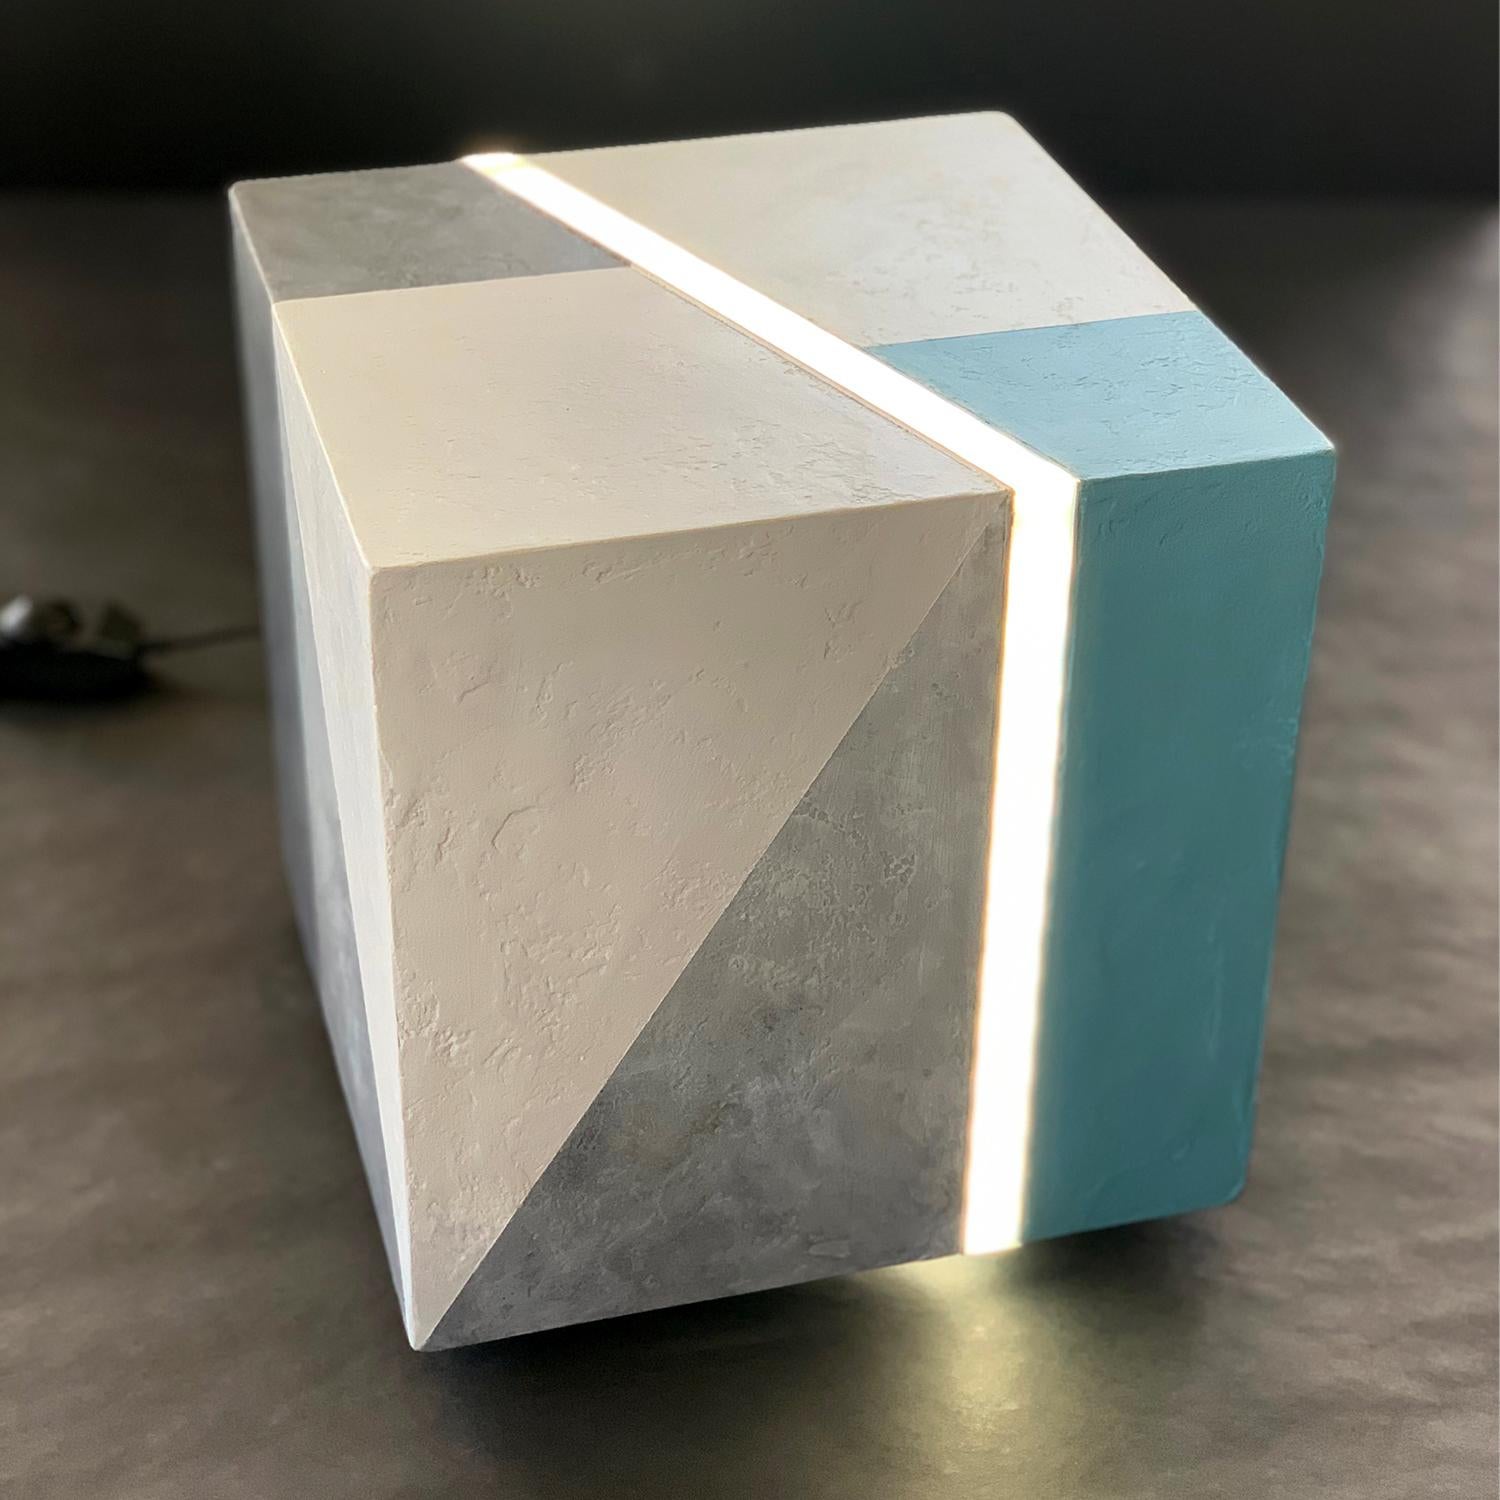 This sculpture light is a captivating addition to the Art + Light series, where the interplay of light and art creates a unique and fascinating effect. The wooden cube is covered with mixed media and painted with acrylic, giving it an exceptional